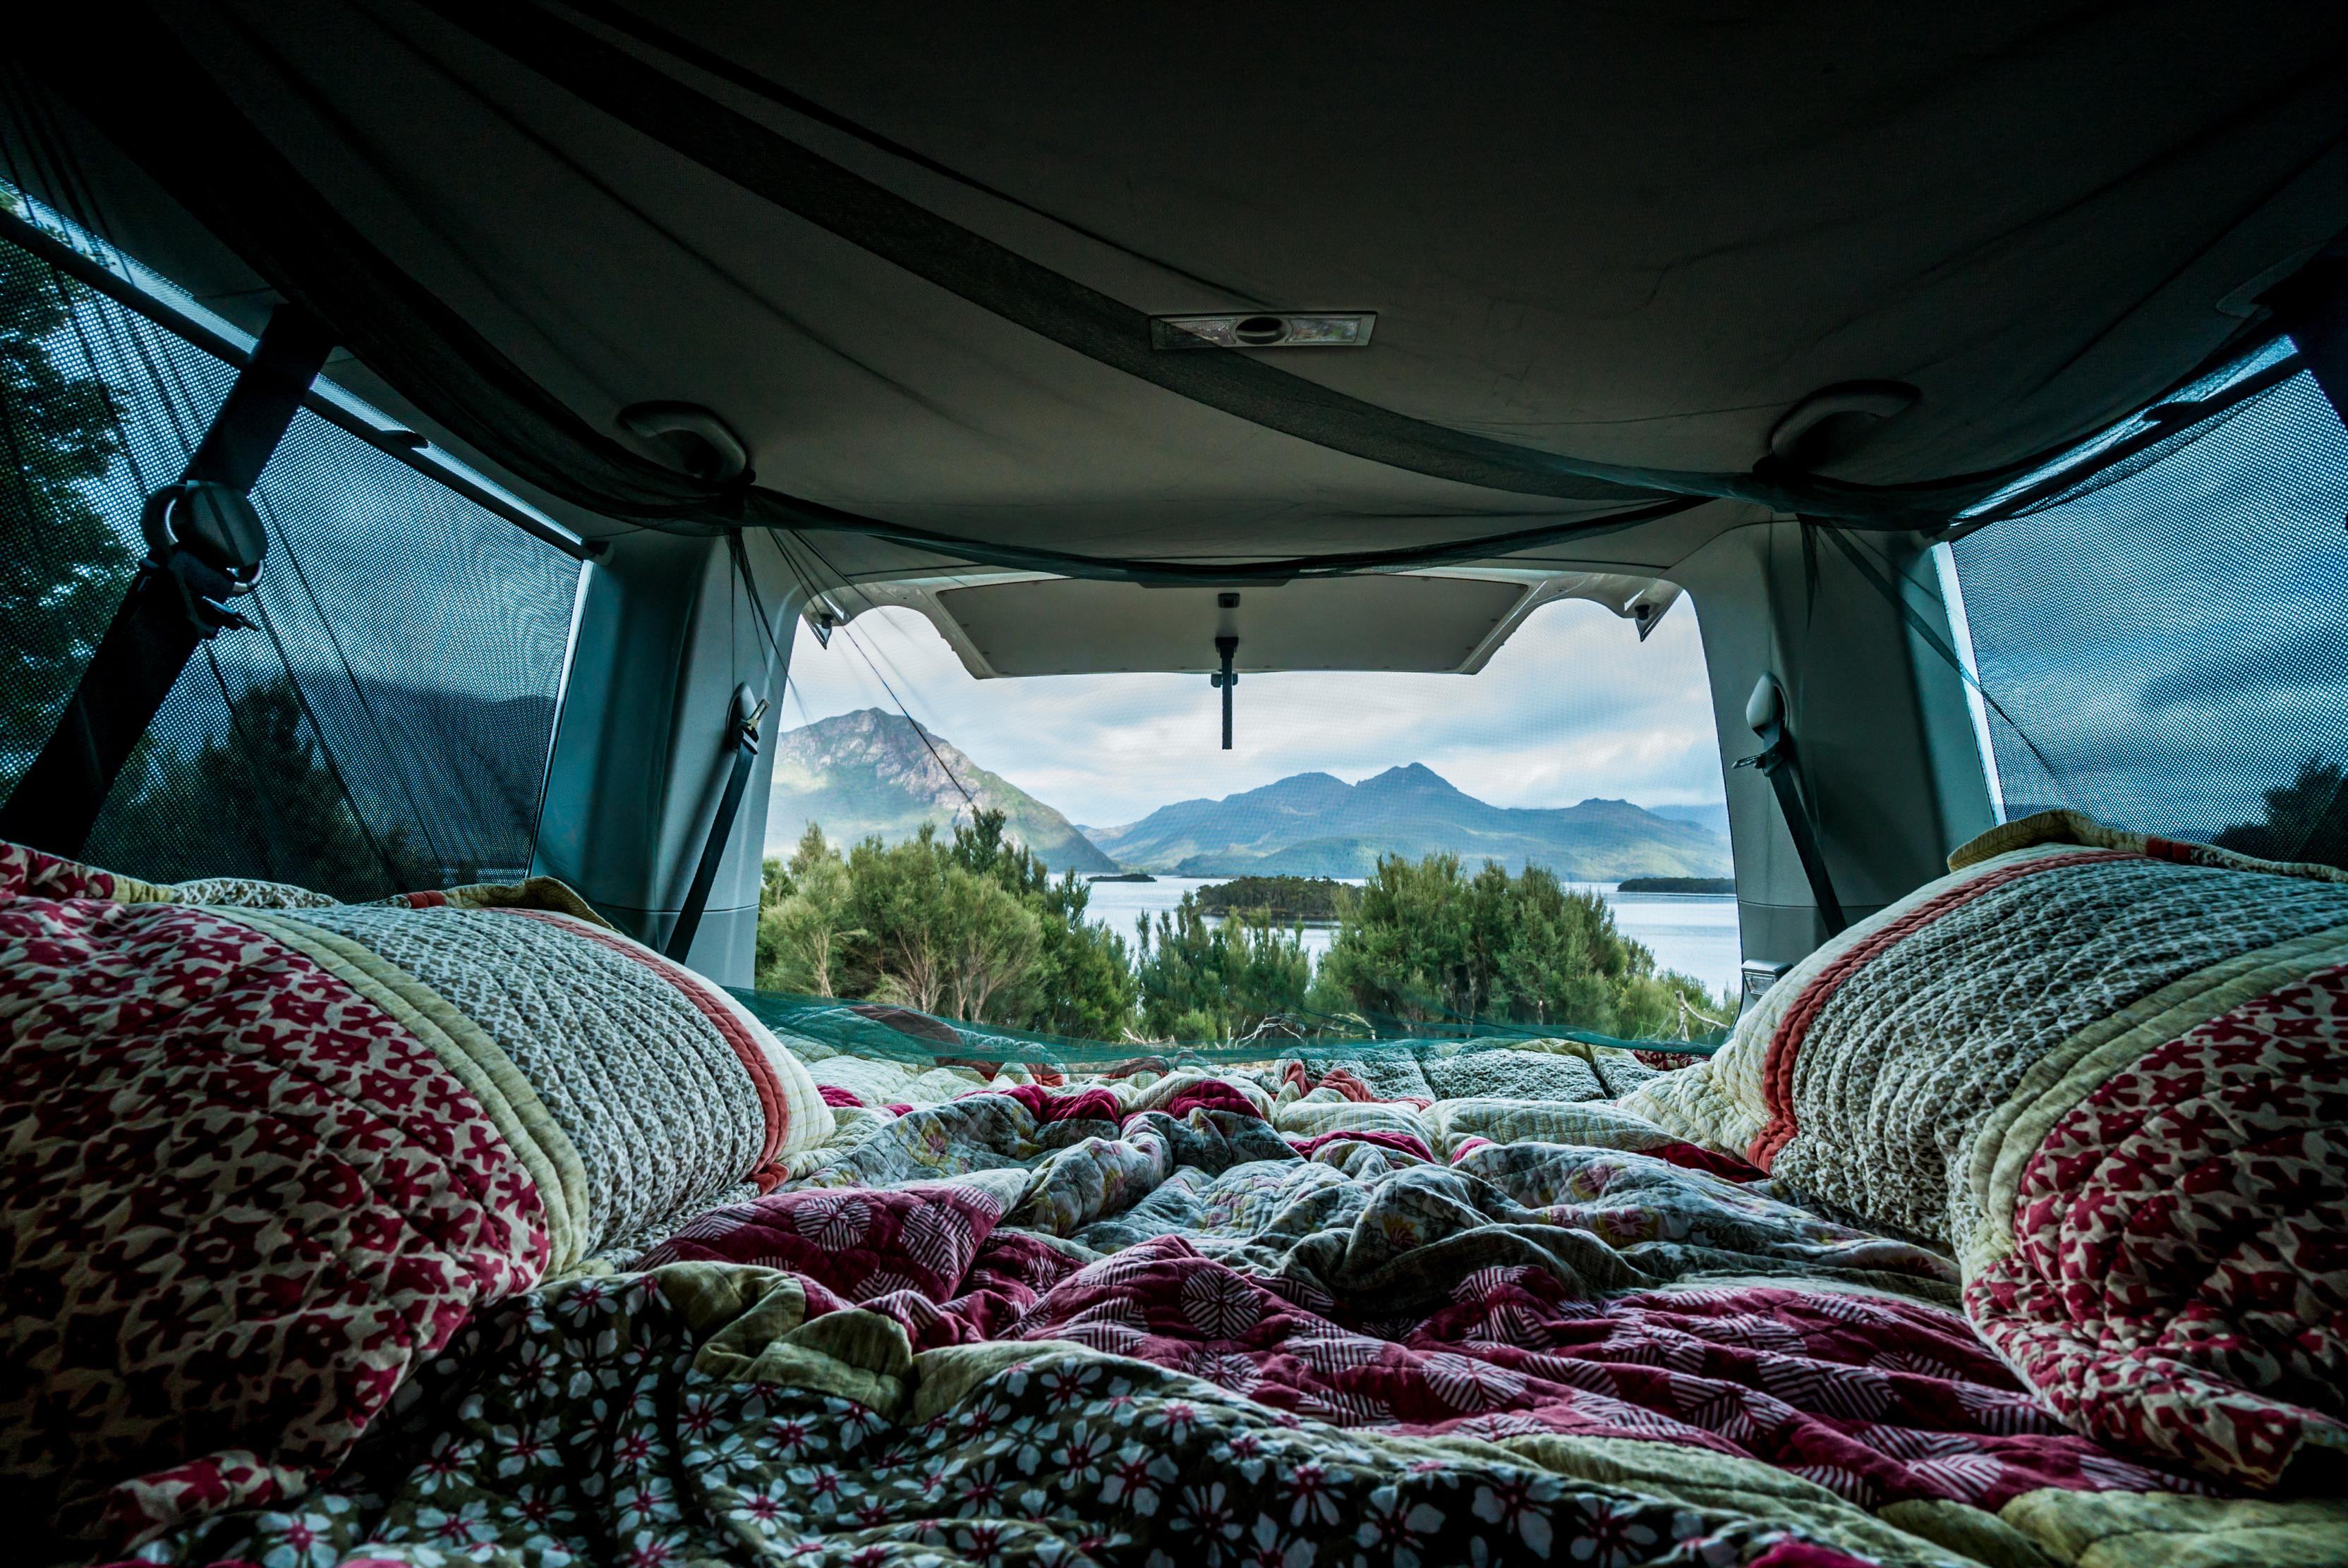 Inside a campervan, dressed in colourful pillows and blankets. Looking onto trees and mountains. Camping at Lake Burbury